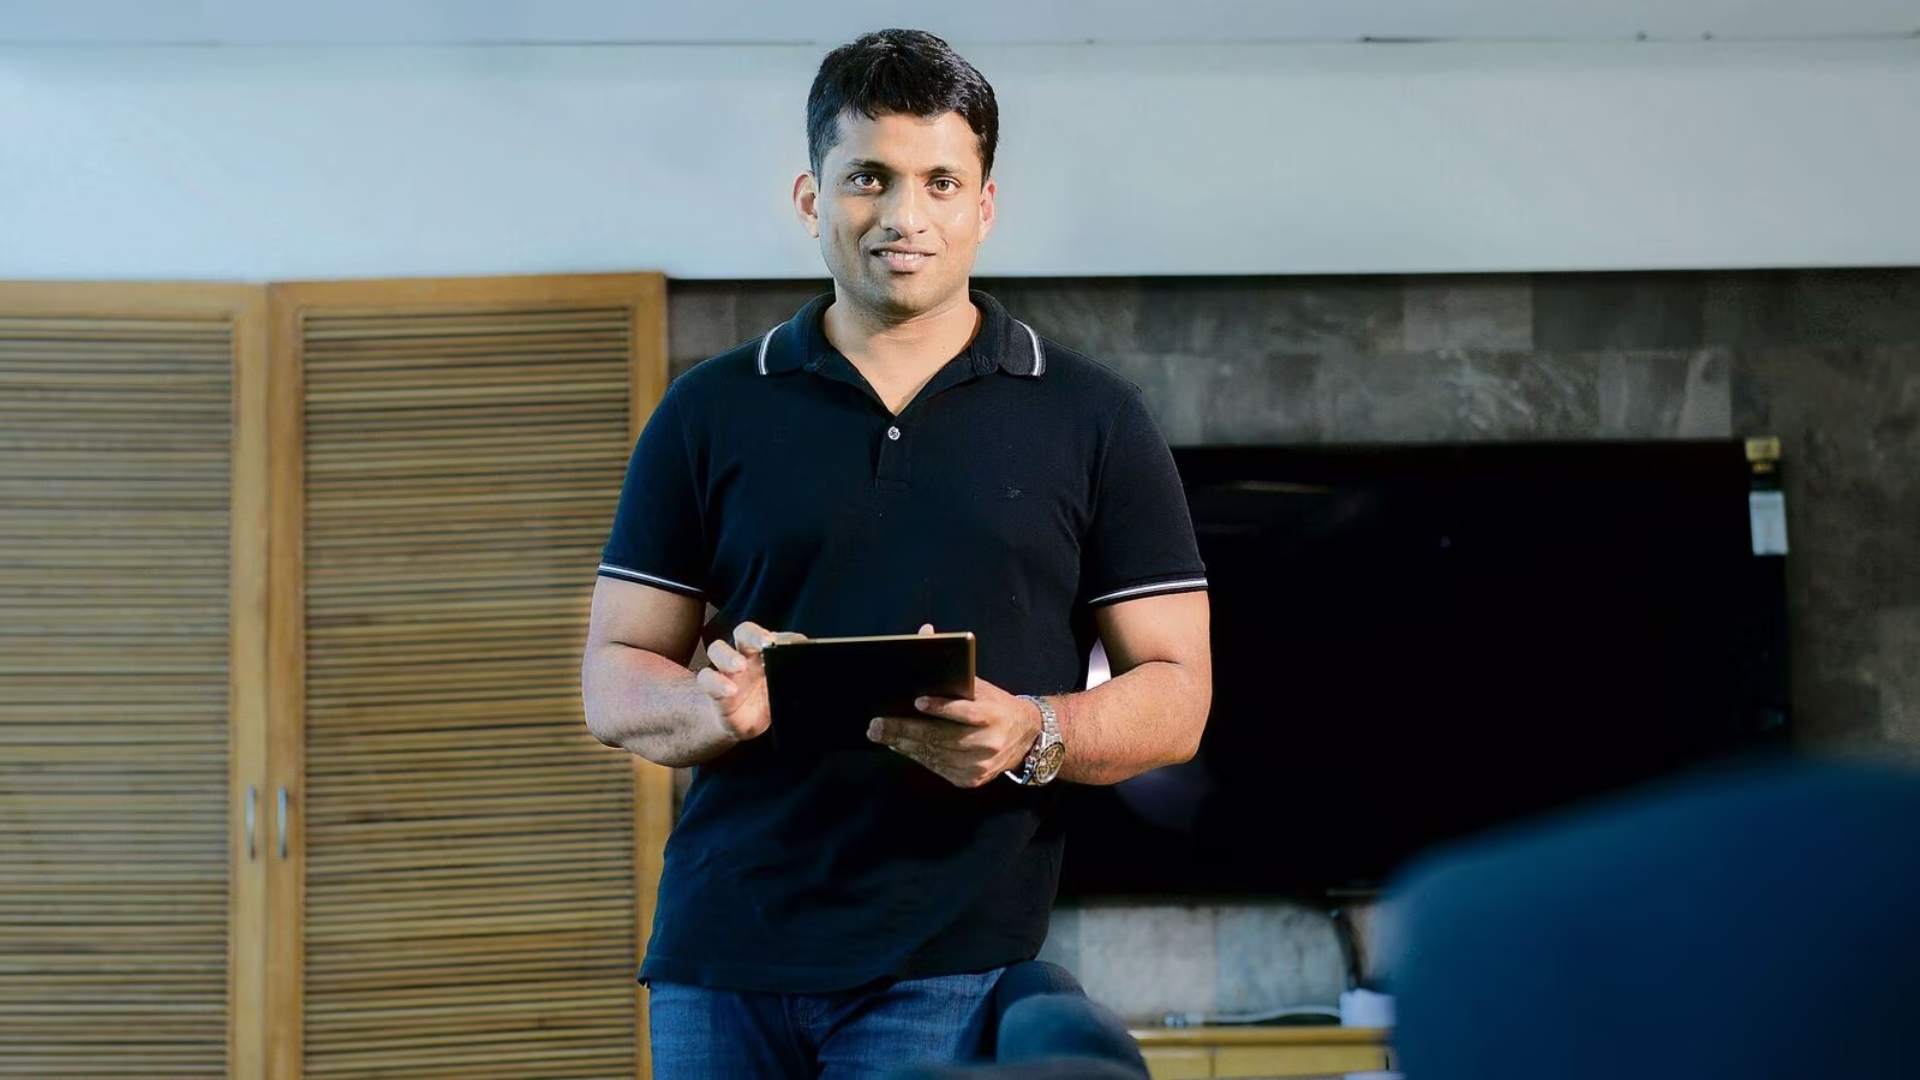 ED Seeks a Lookout Notice for Byju’s Founder, Byju Raveendran